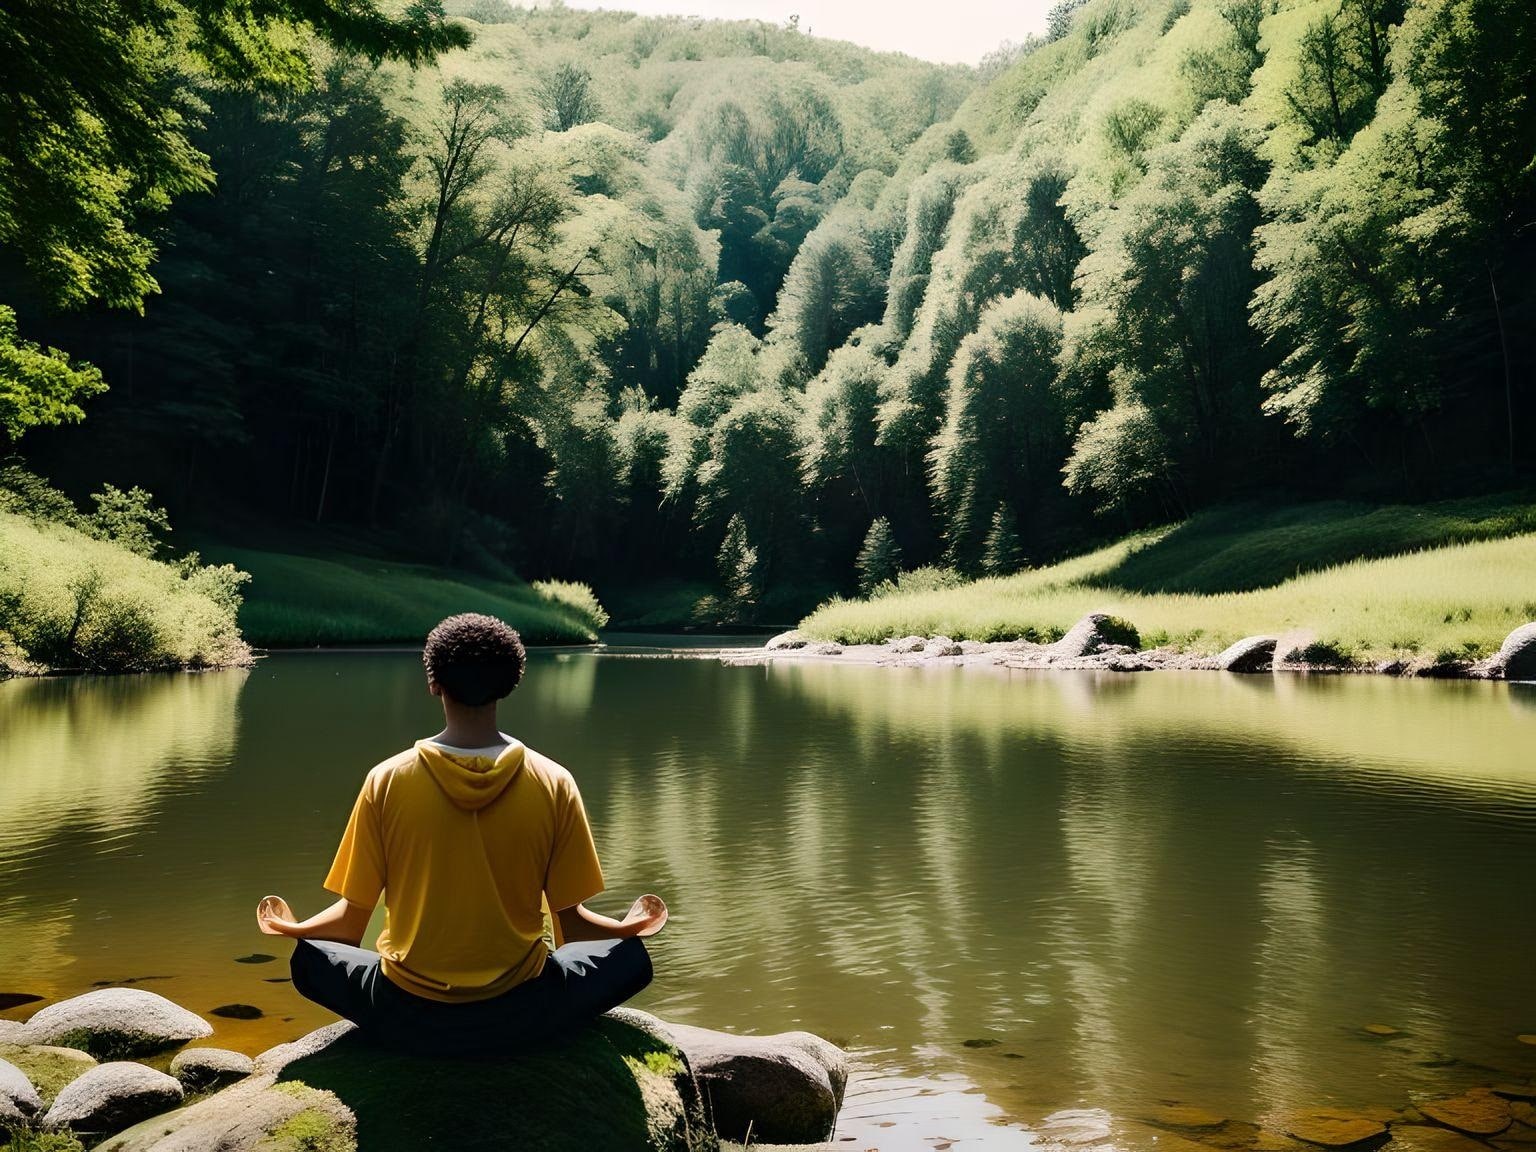  A serene nature scene with a person meditating amidst a tranquil setting, focusing on their breath.